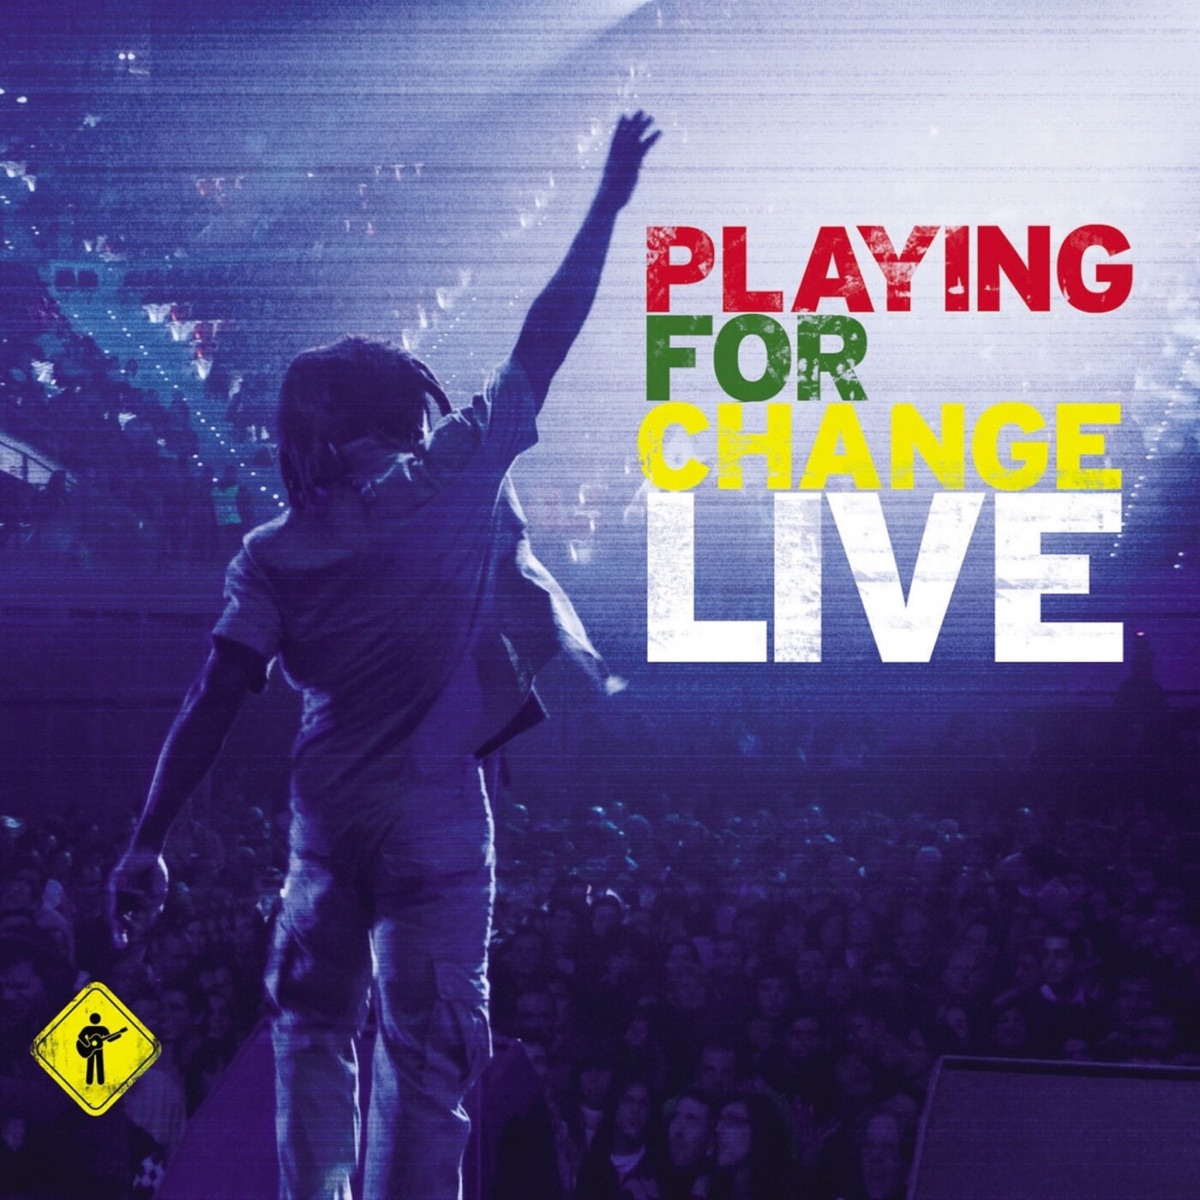 Live Outside, Vol.1 - Album by Playing for Change - Apple Music